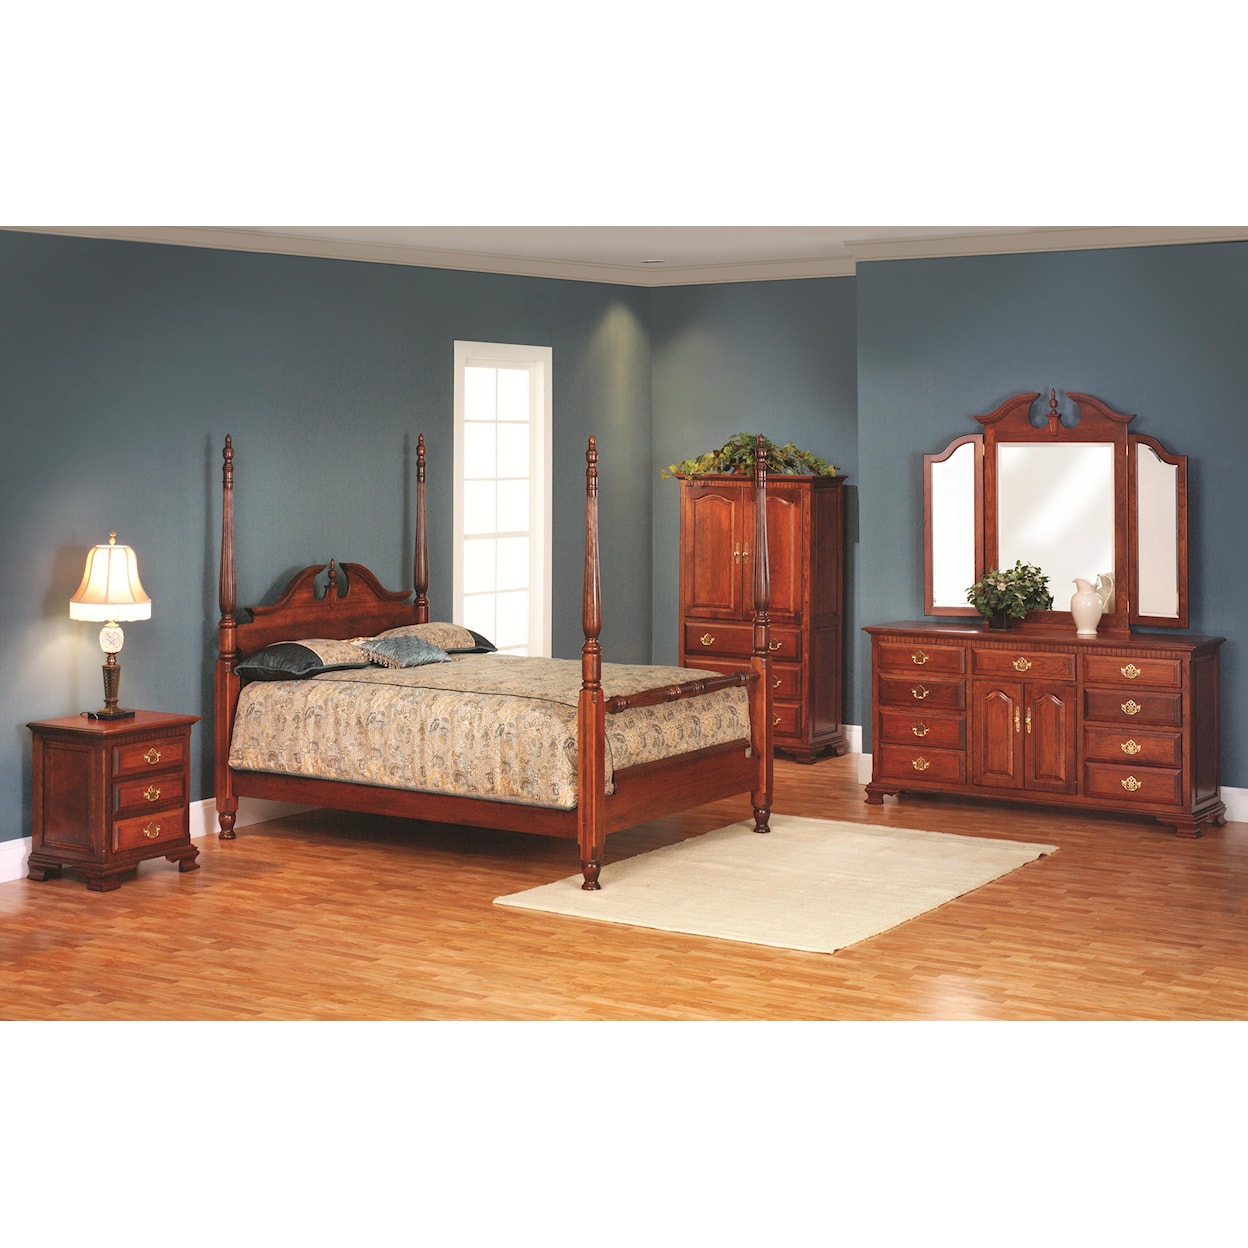 Millcraft Victorias Tradition Queen Poster Bedroom Group